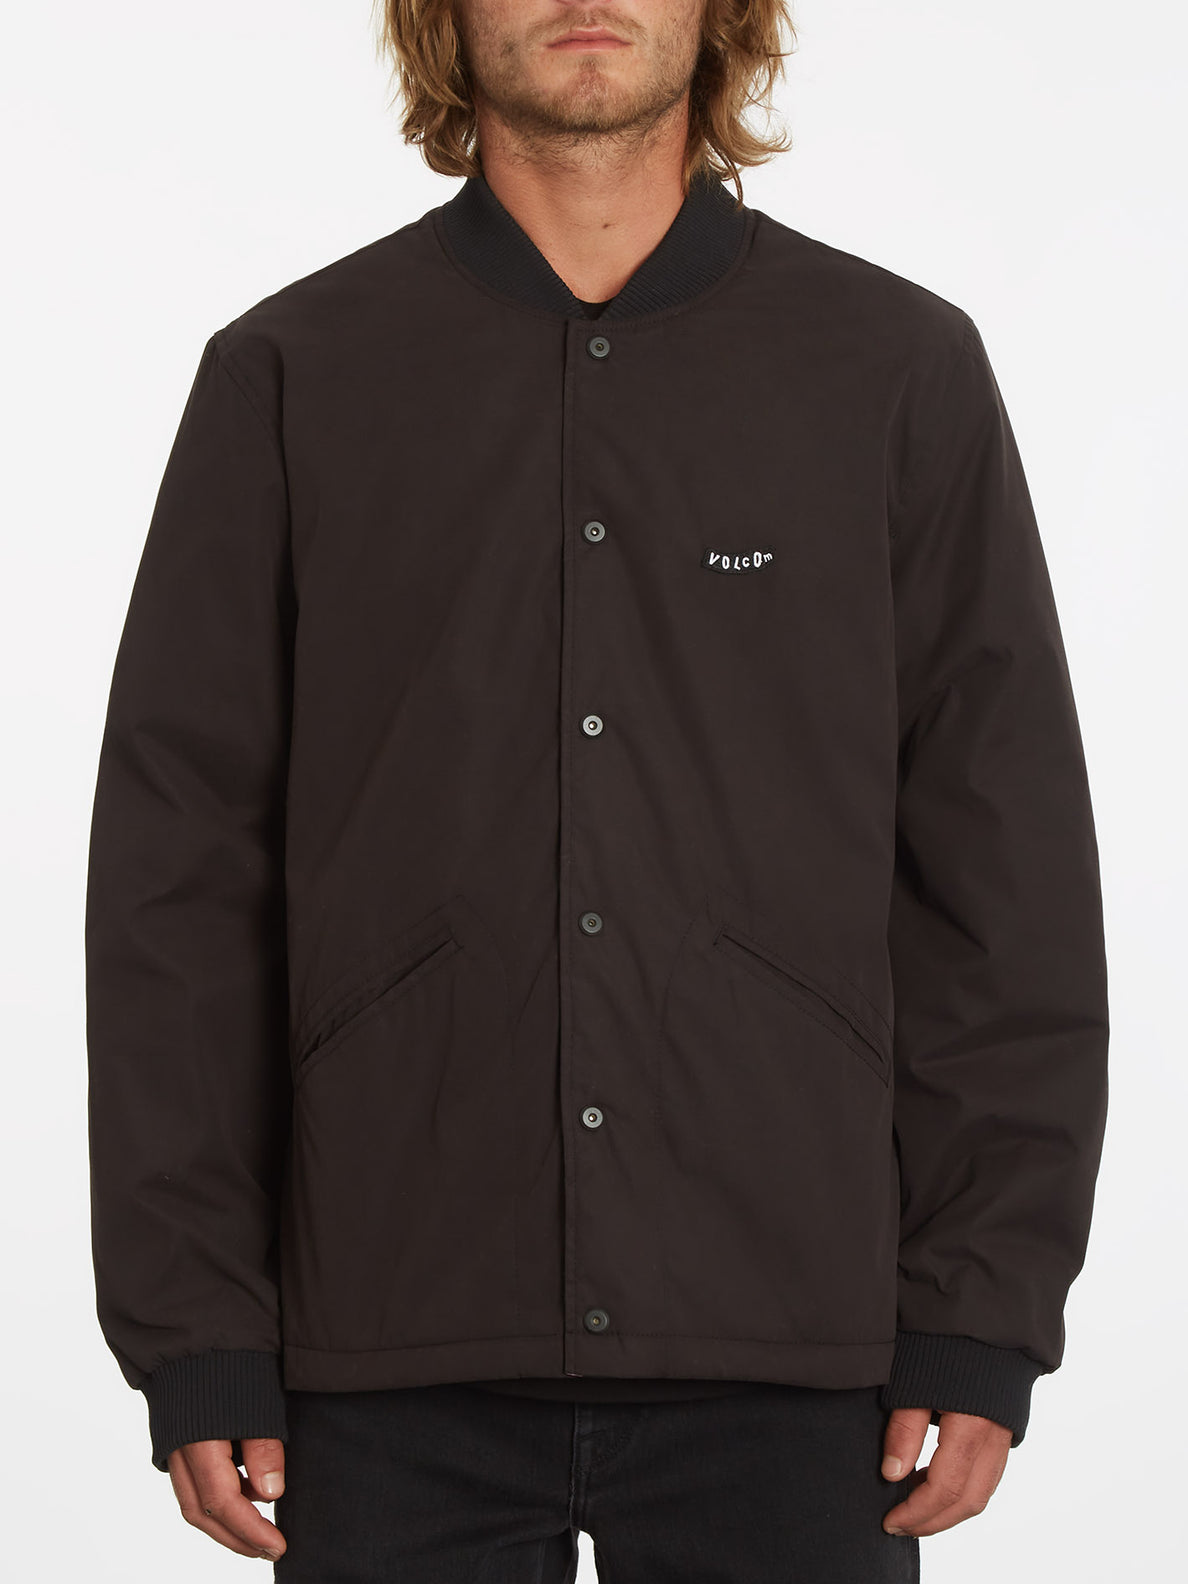 Lookster Jacket (Reversible) - BLACK (A1632007_BLK) [F]